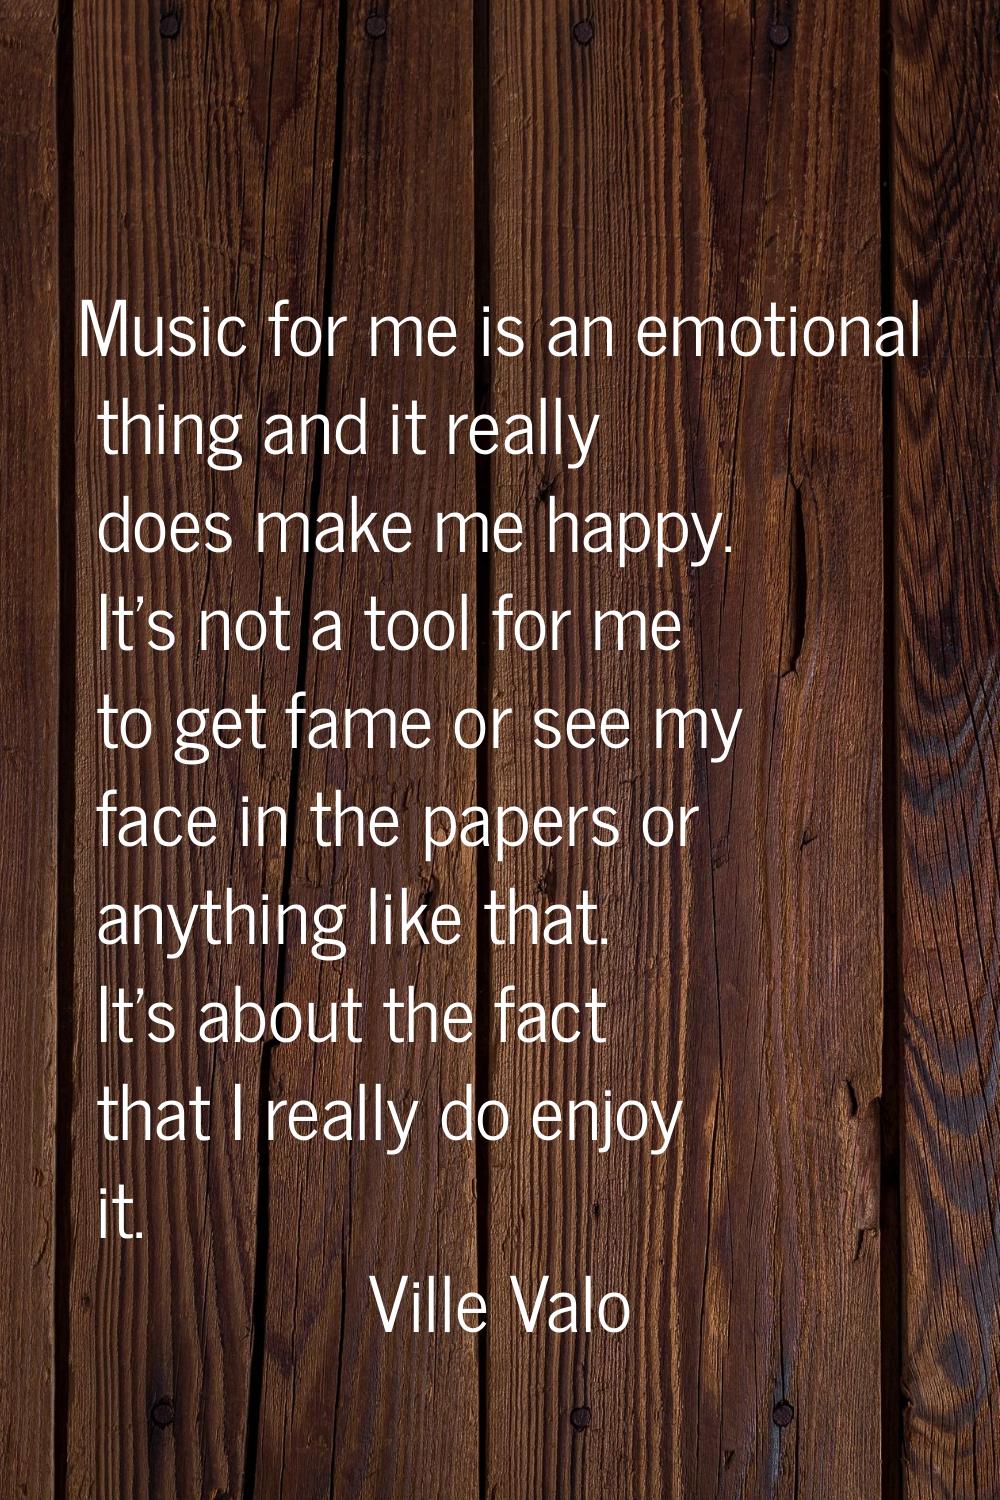 Music for me is an emotional thing and it really does make me happy. It's not a tool for me to get 